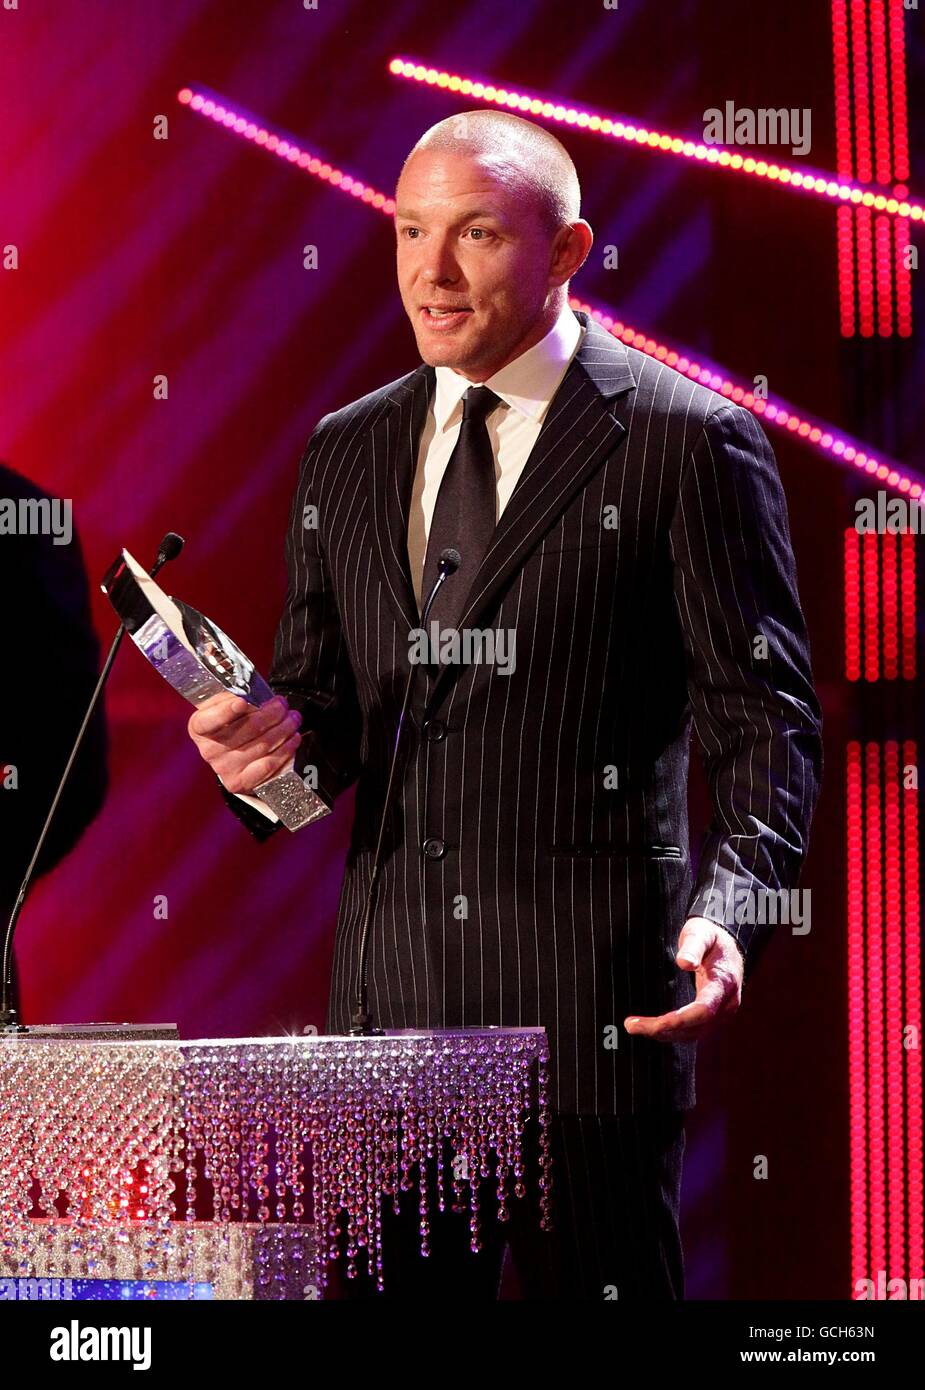 Guy Ritchie on stage to collect the Best Action/Thriller award for Sherlock Holmes at the 2010 National Movie Awards at the Royal Festival Hall, London. Stock Photo